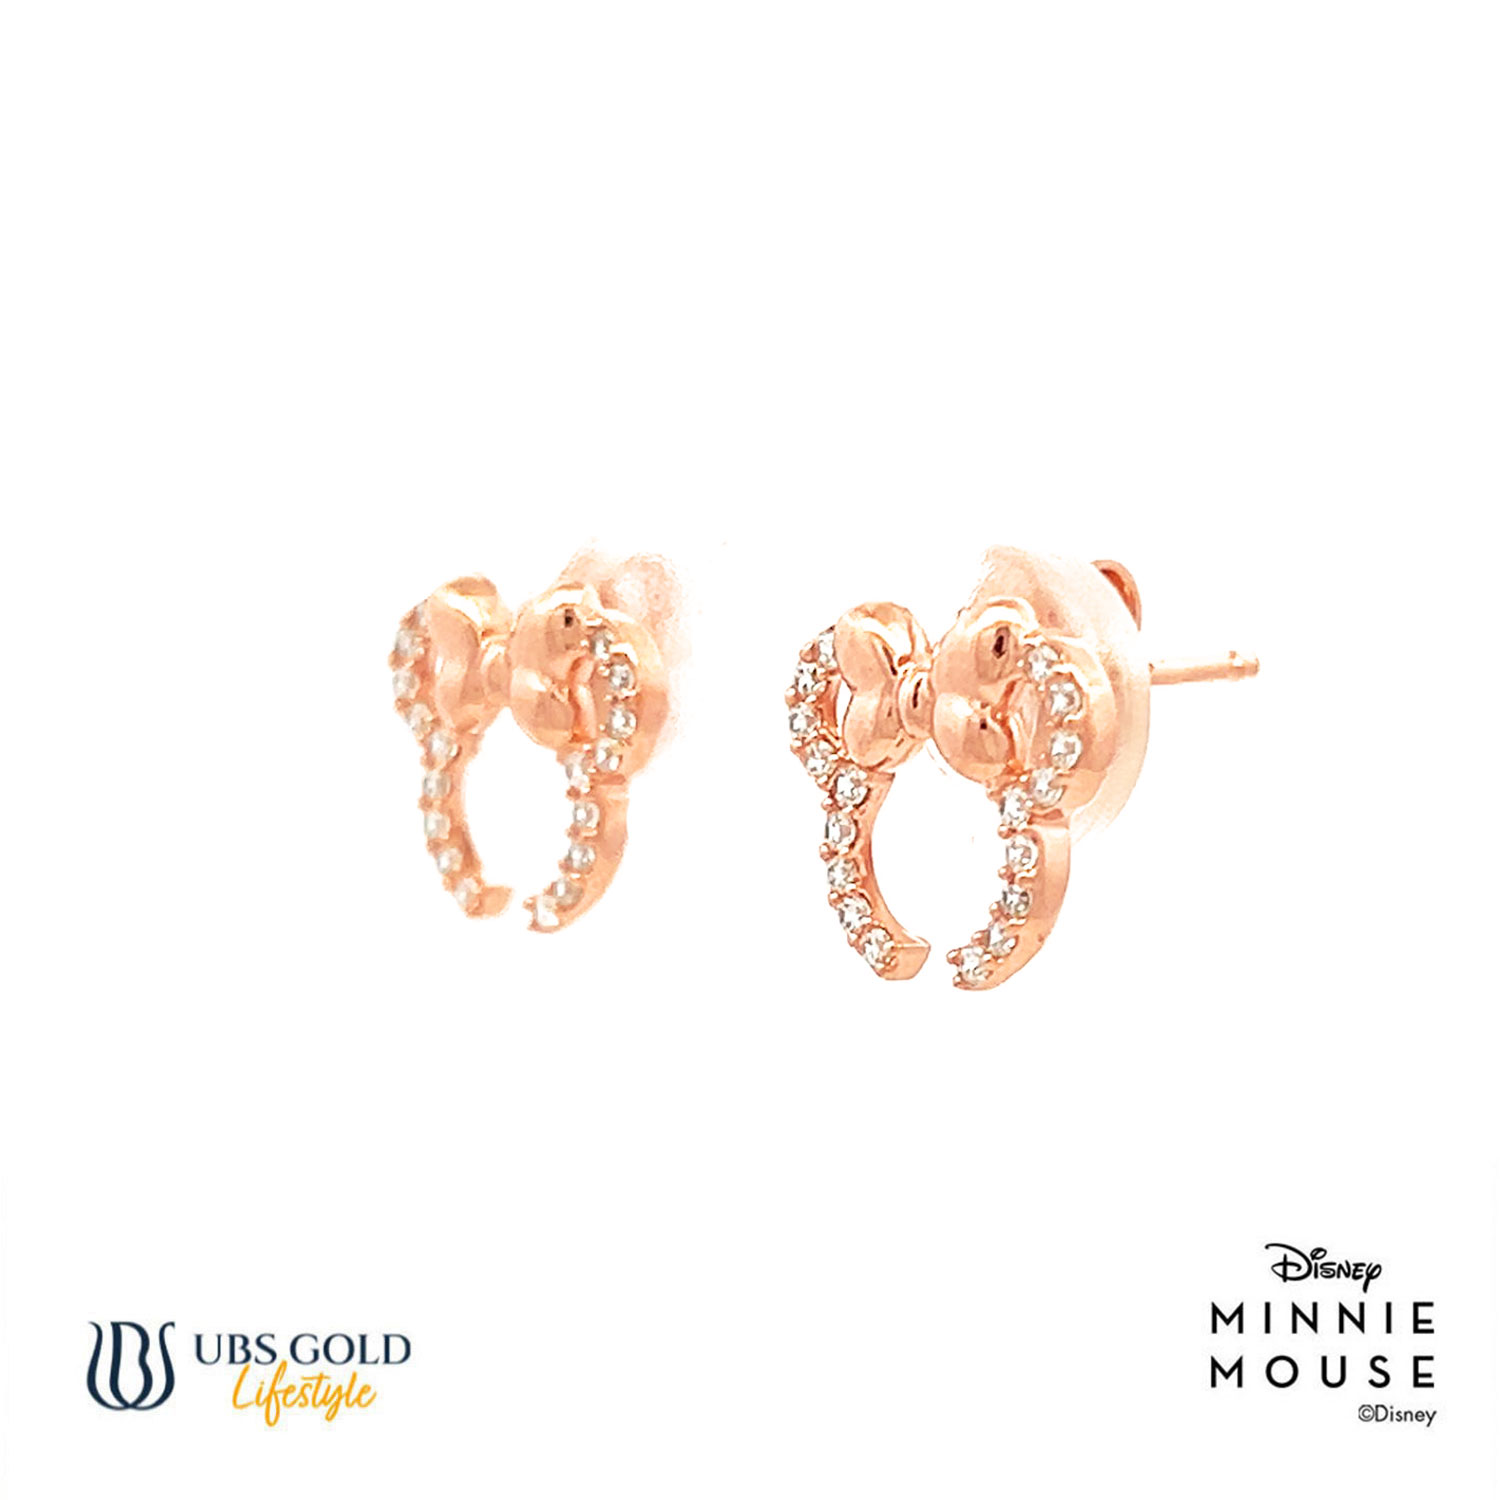 UBS Gold Anting Emas Disney Minnie Mouse - Cwy0052 - 17K